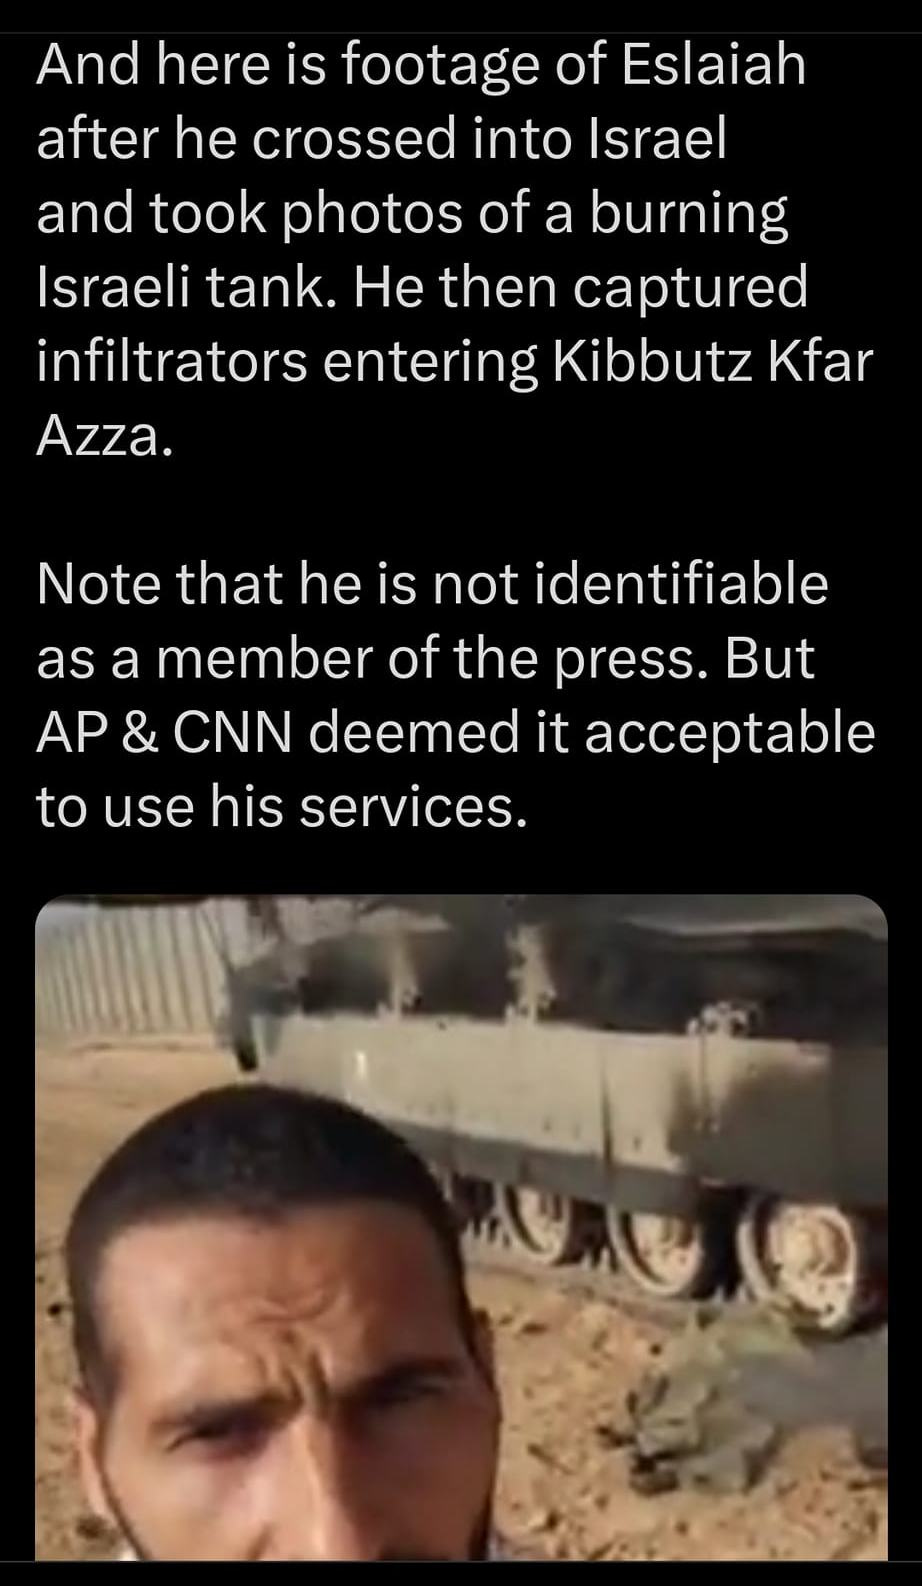 May be an image of 1 person and text that says '3:48 4G 100% Post And here is footage of Eslaiah after he crossed into Israel and took photos of a burning Israeli tank. He then captured infiltrators entering Kibbutz Kfar Azza. Note that he is not identifiable as a member of the press. But AP CNN deemed it acceptable to use his services. ' repl Post |||'